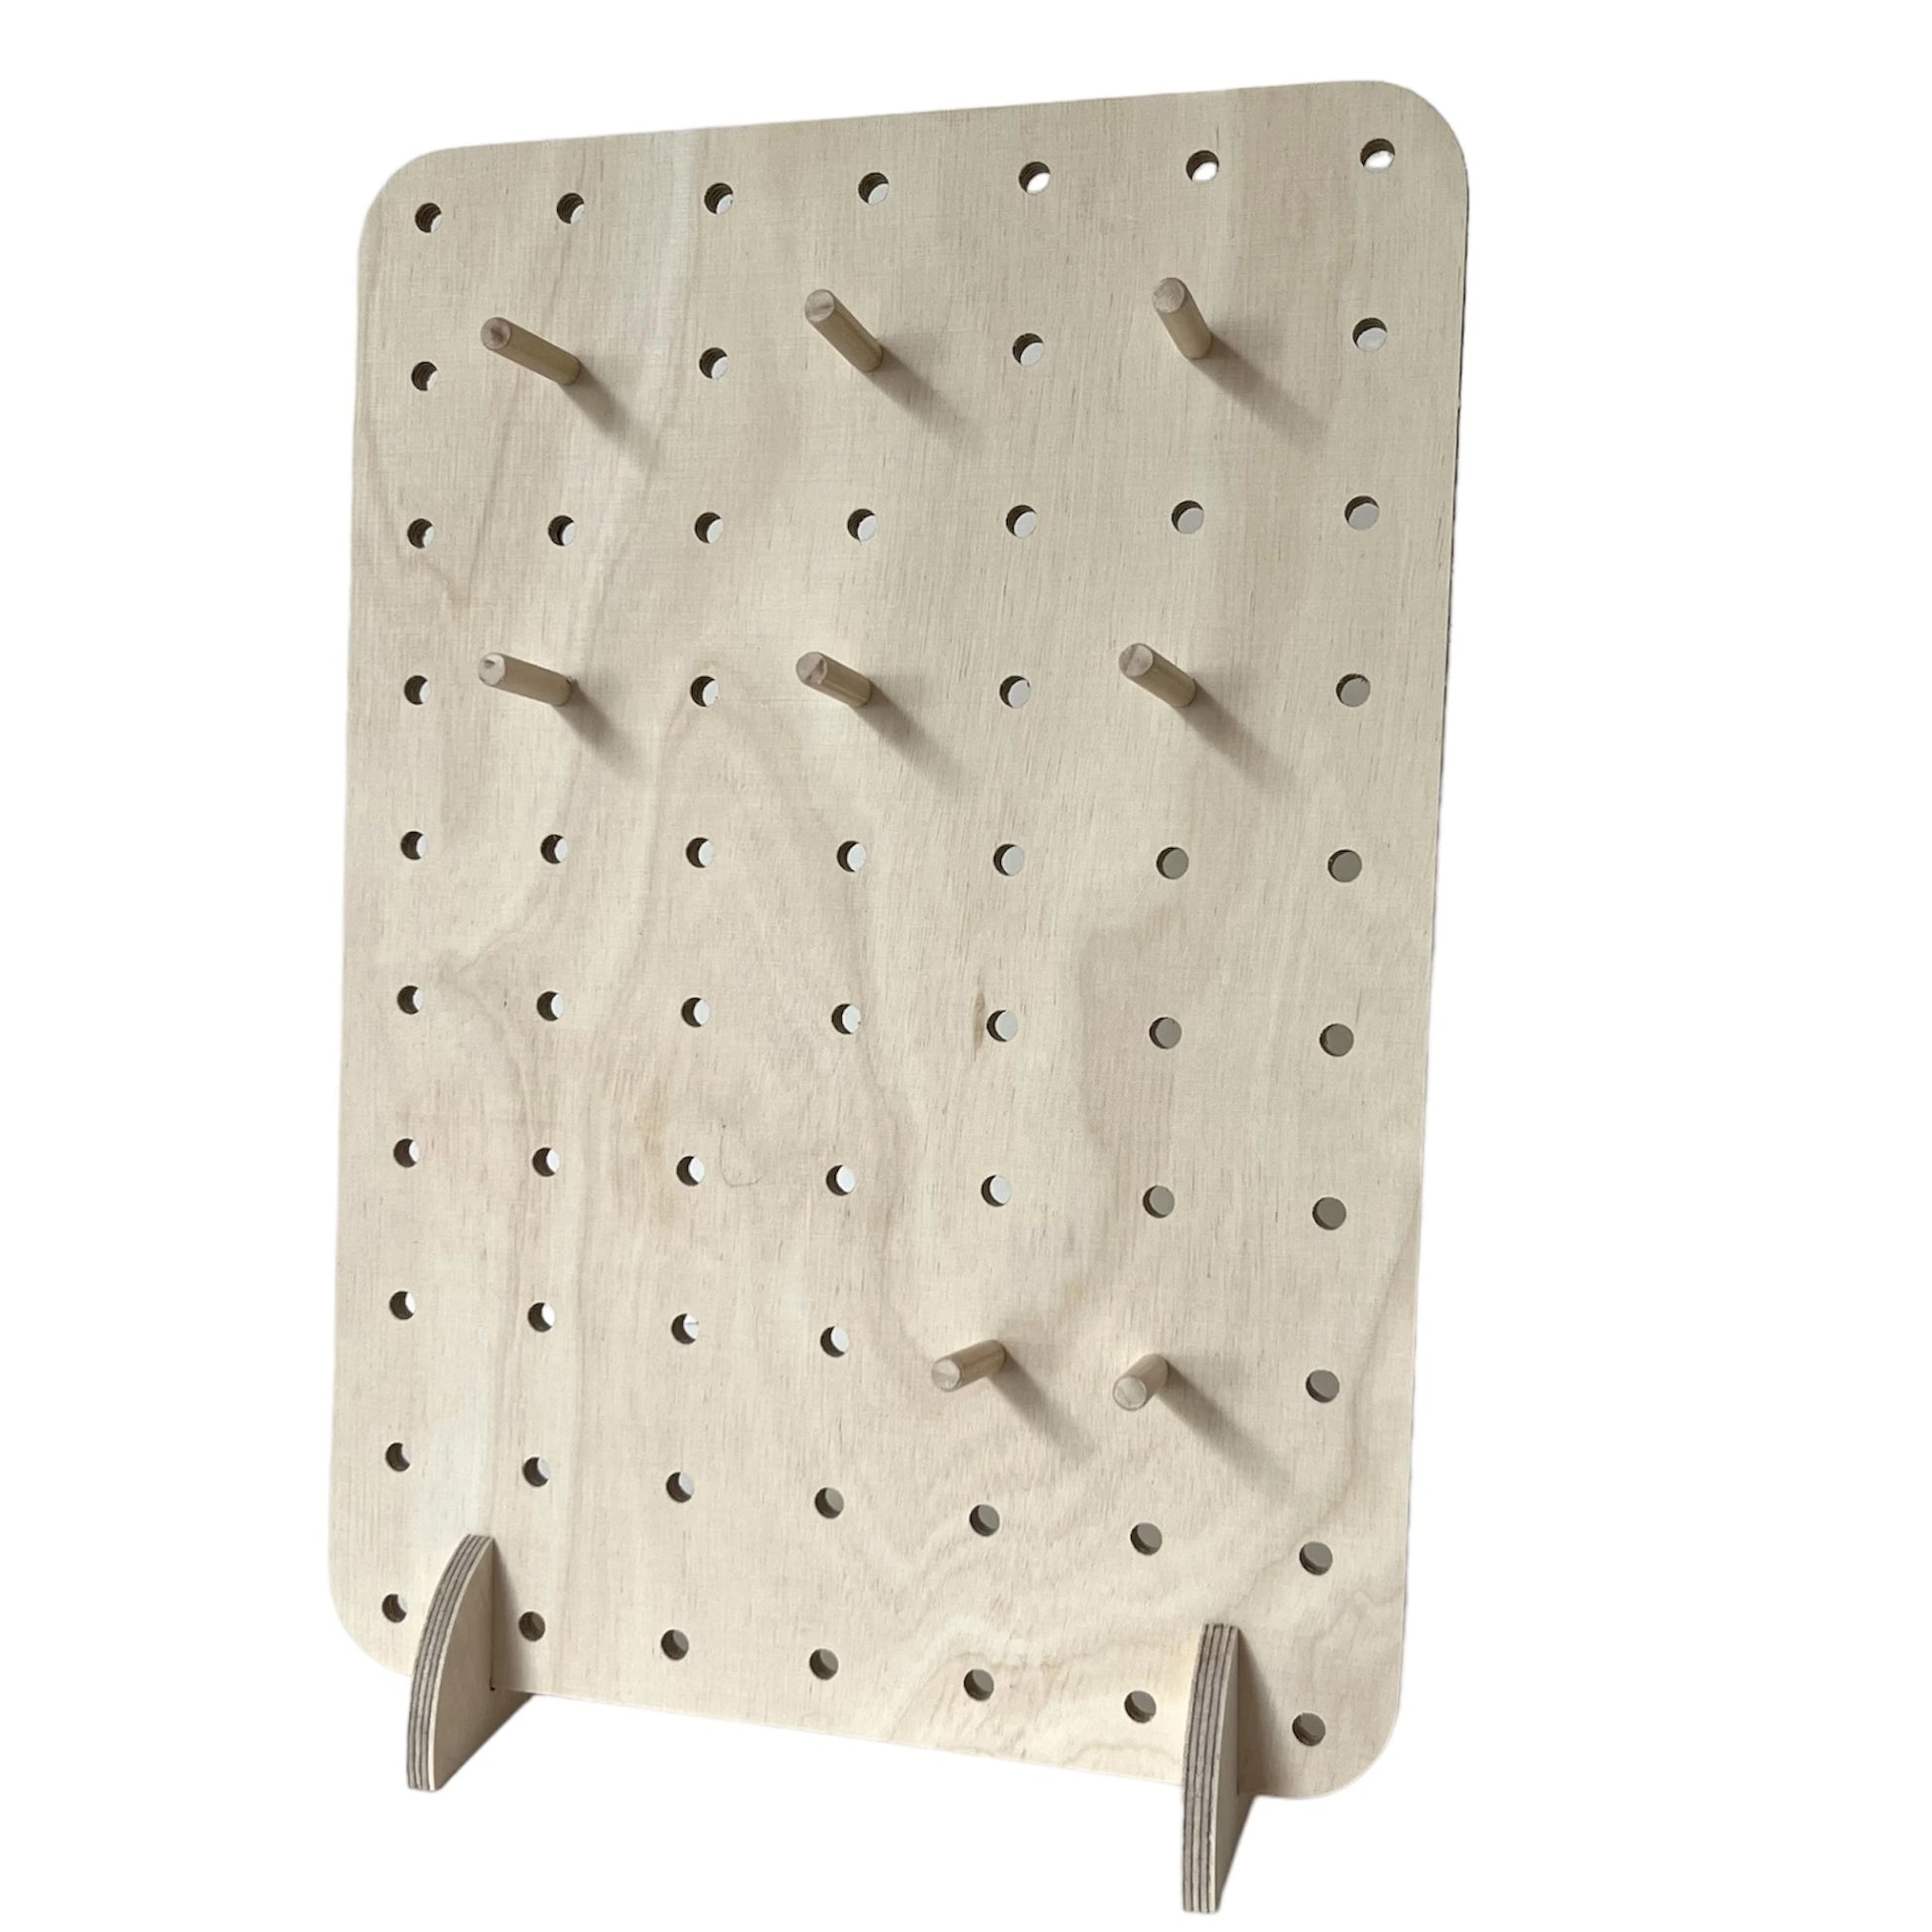 Pale wooden pegboard with small 6mm drilled holes and eight pegs facing to left